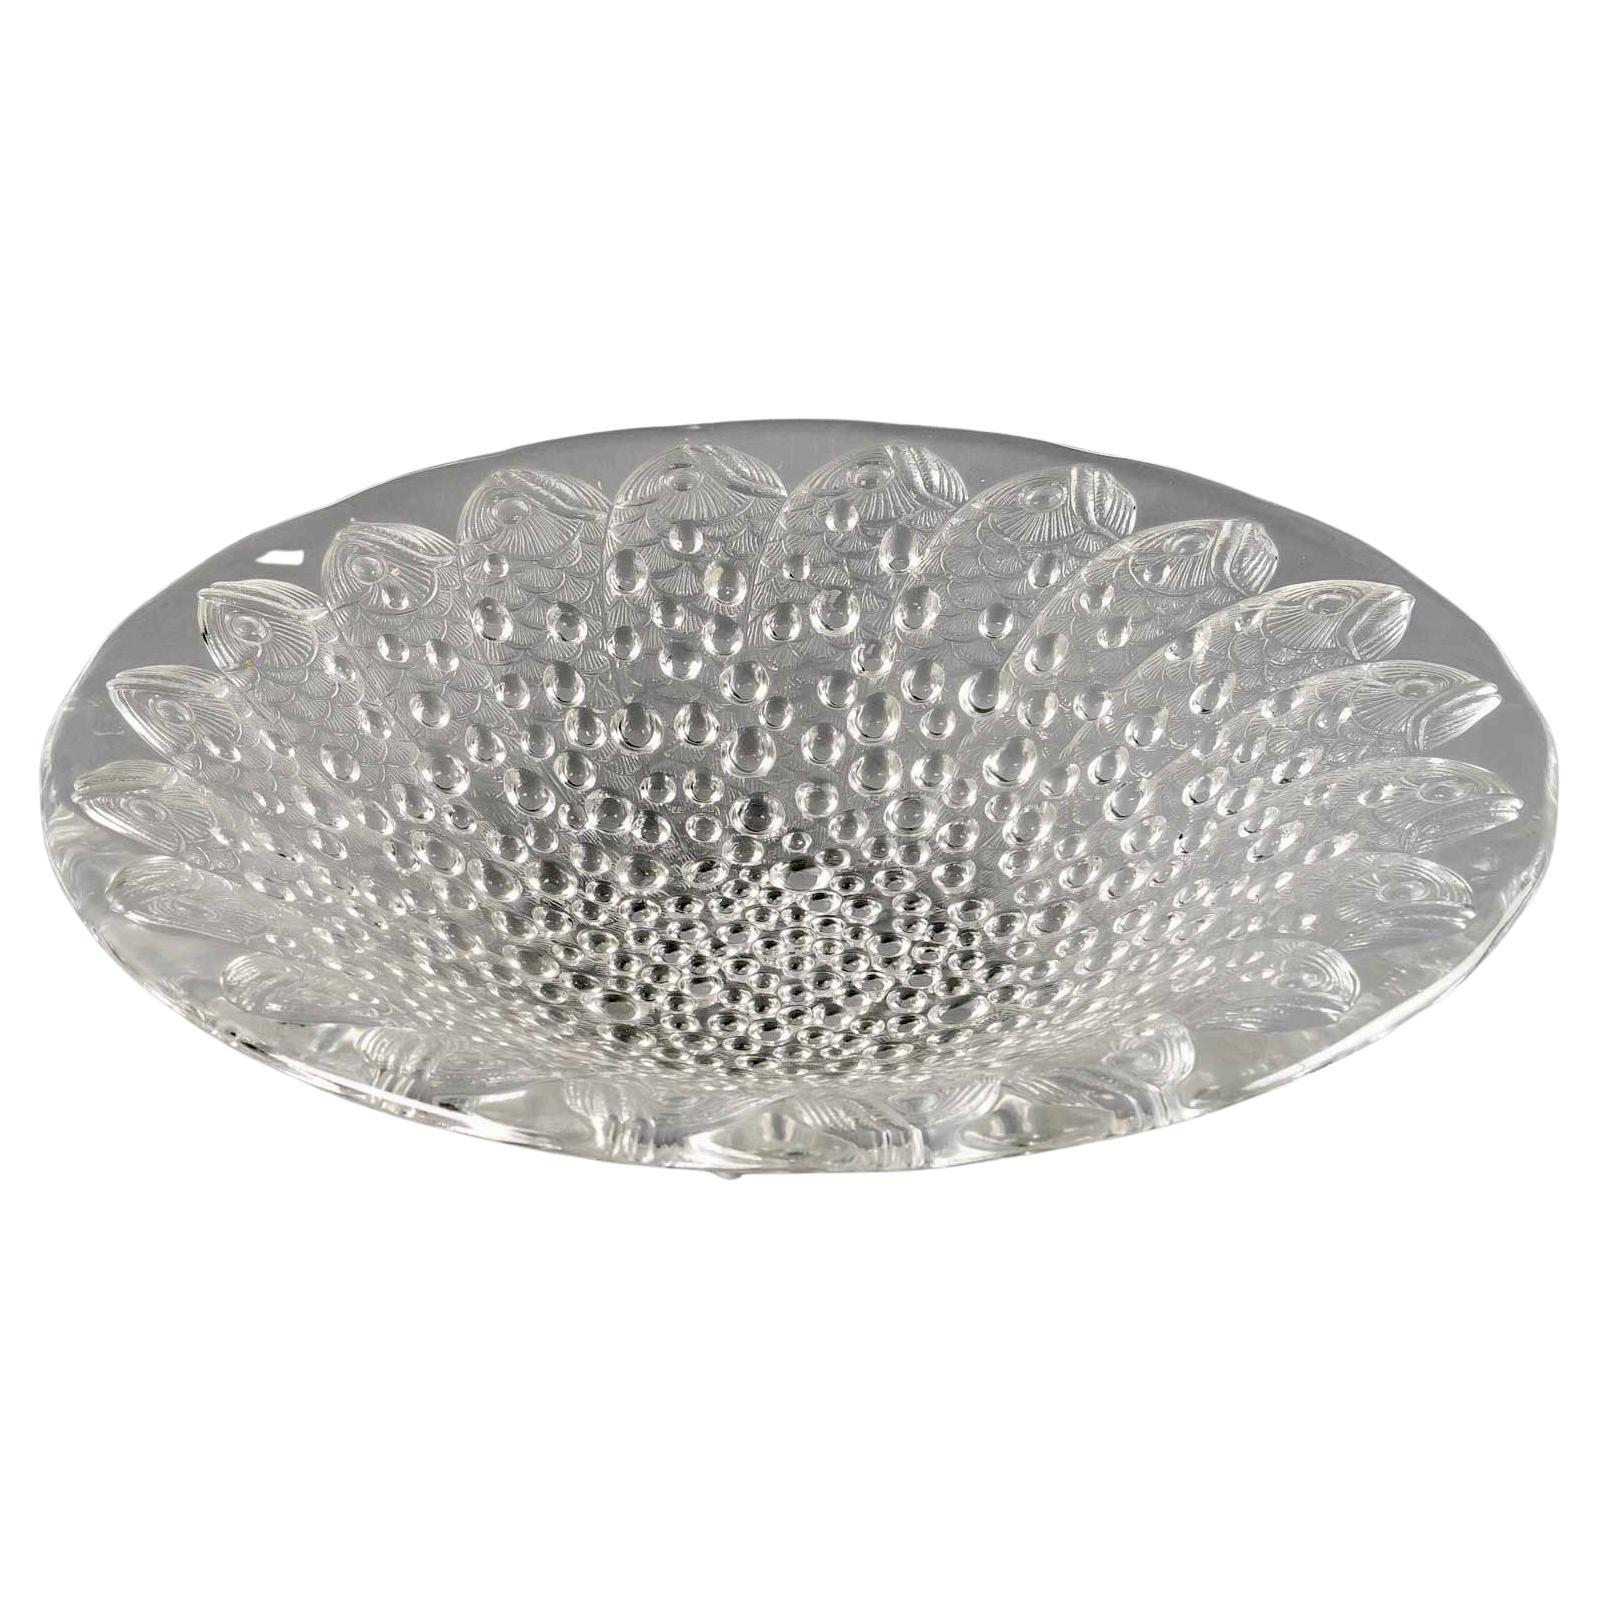 1932 René Lalique - Bowl Dish Roscoff Clear Glass - Fishes